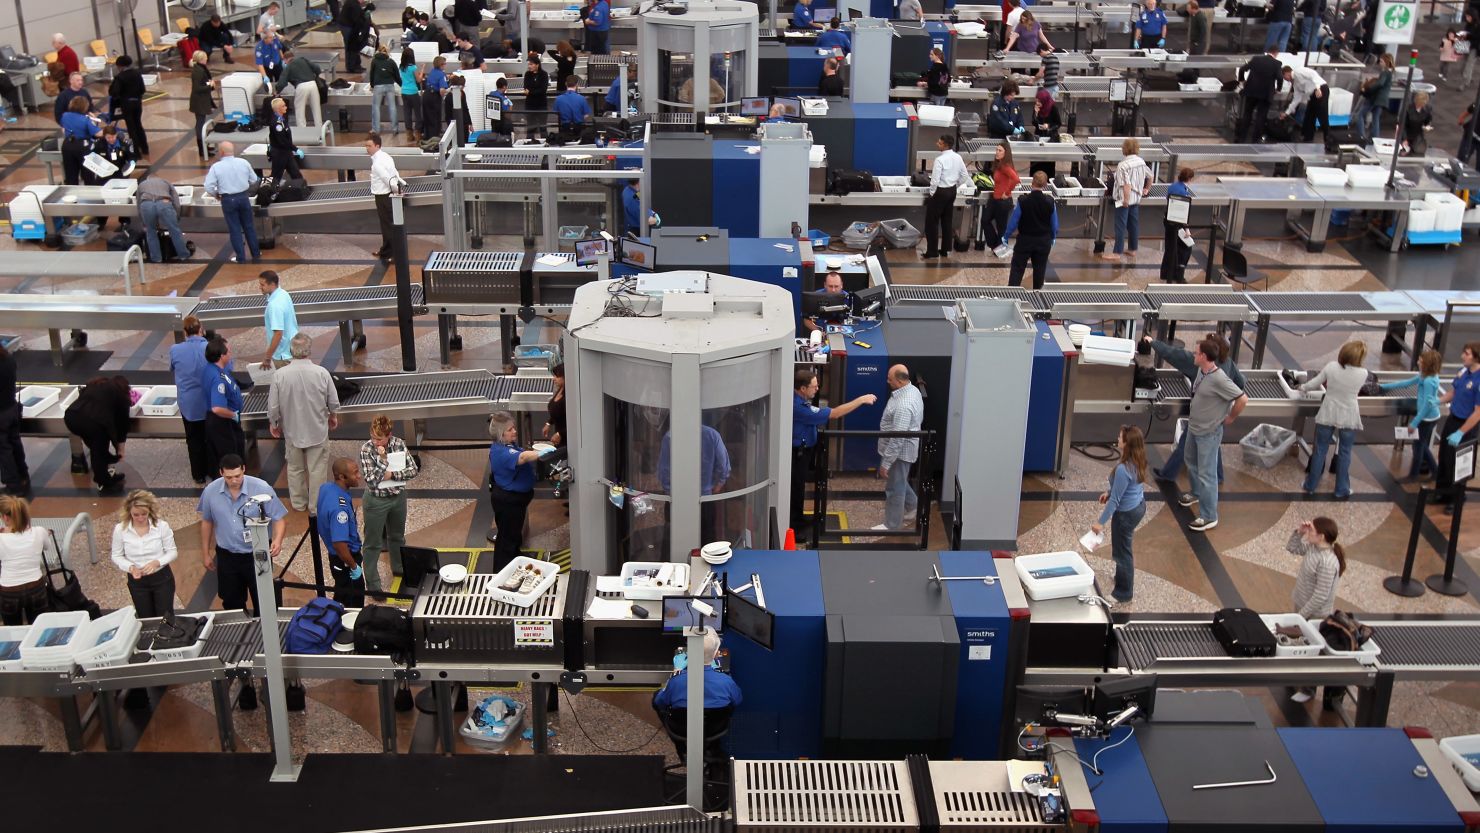 The TSA's airline passenger security fee is increasing today under a congressional budget deal reached in December. 